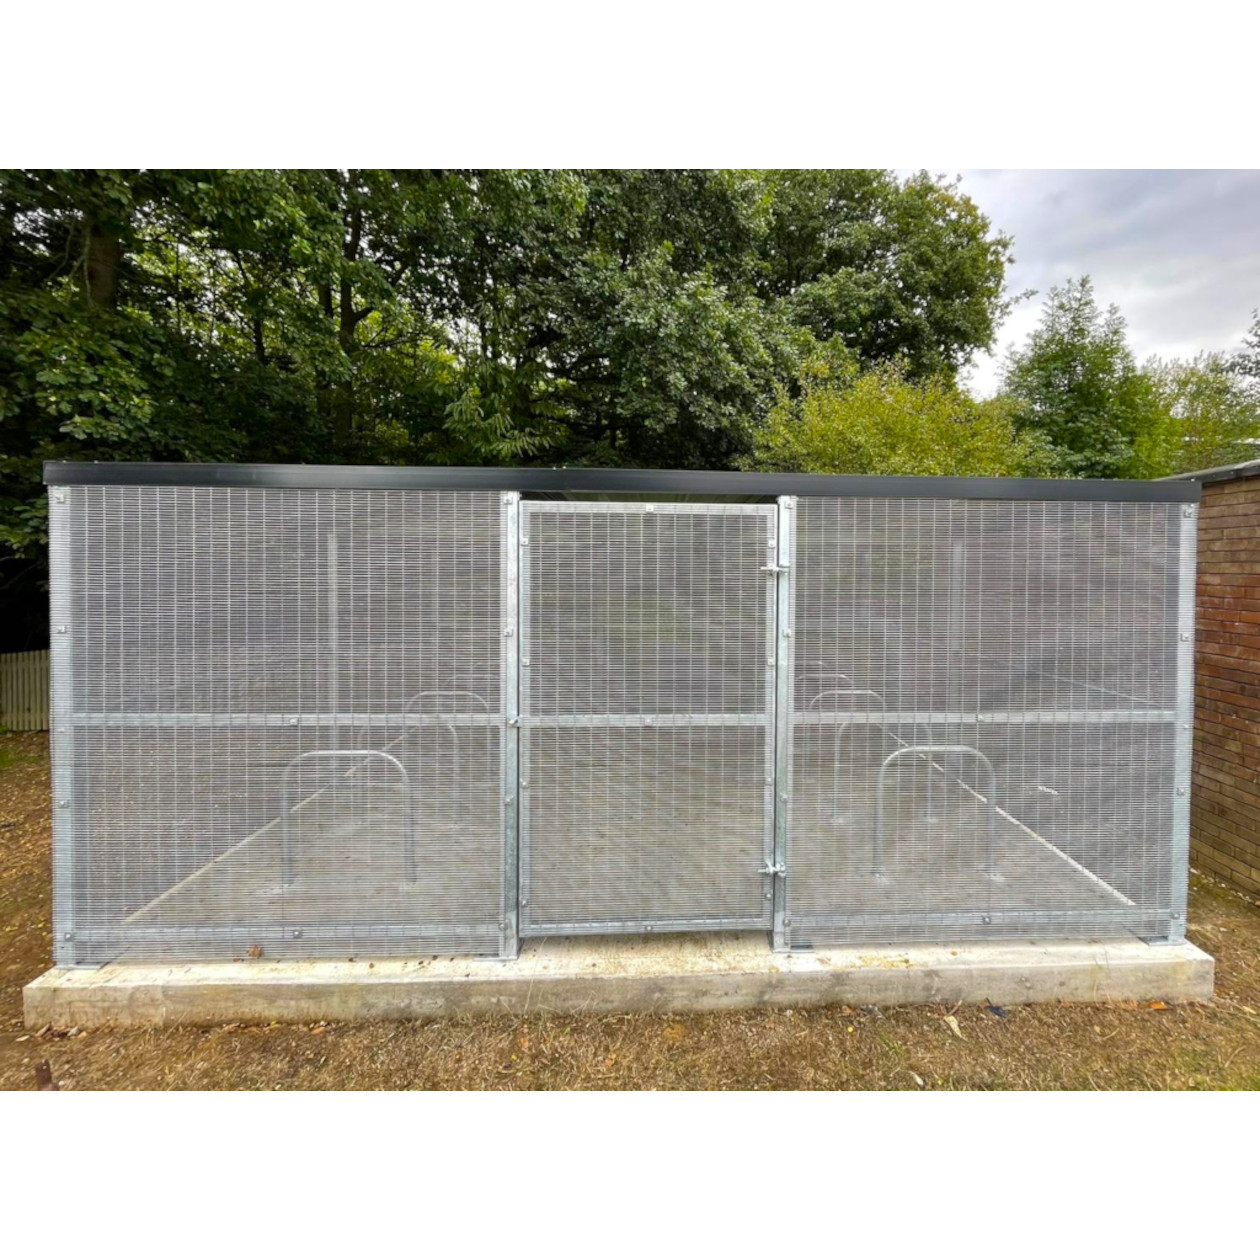 20-40 Security Cycle Enclosure RS3